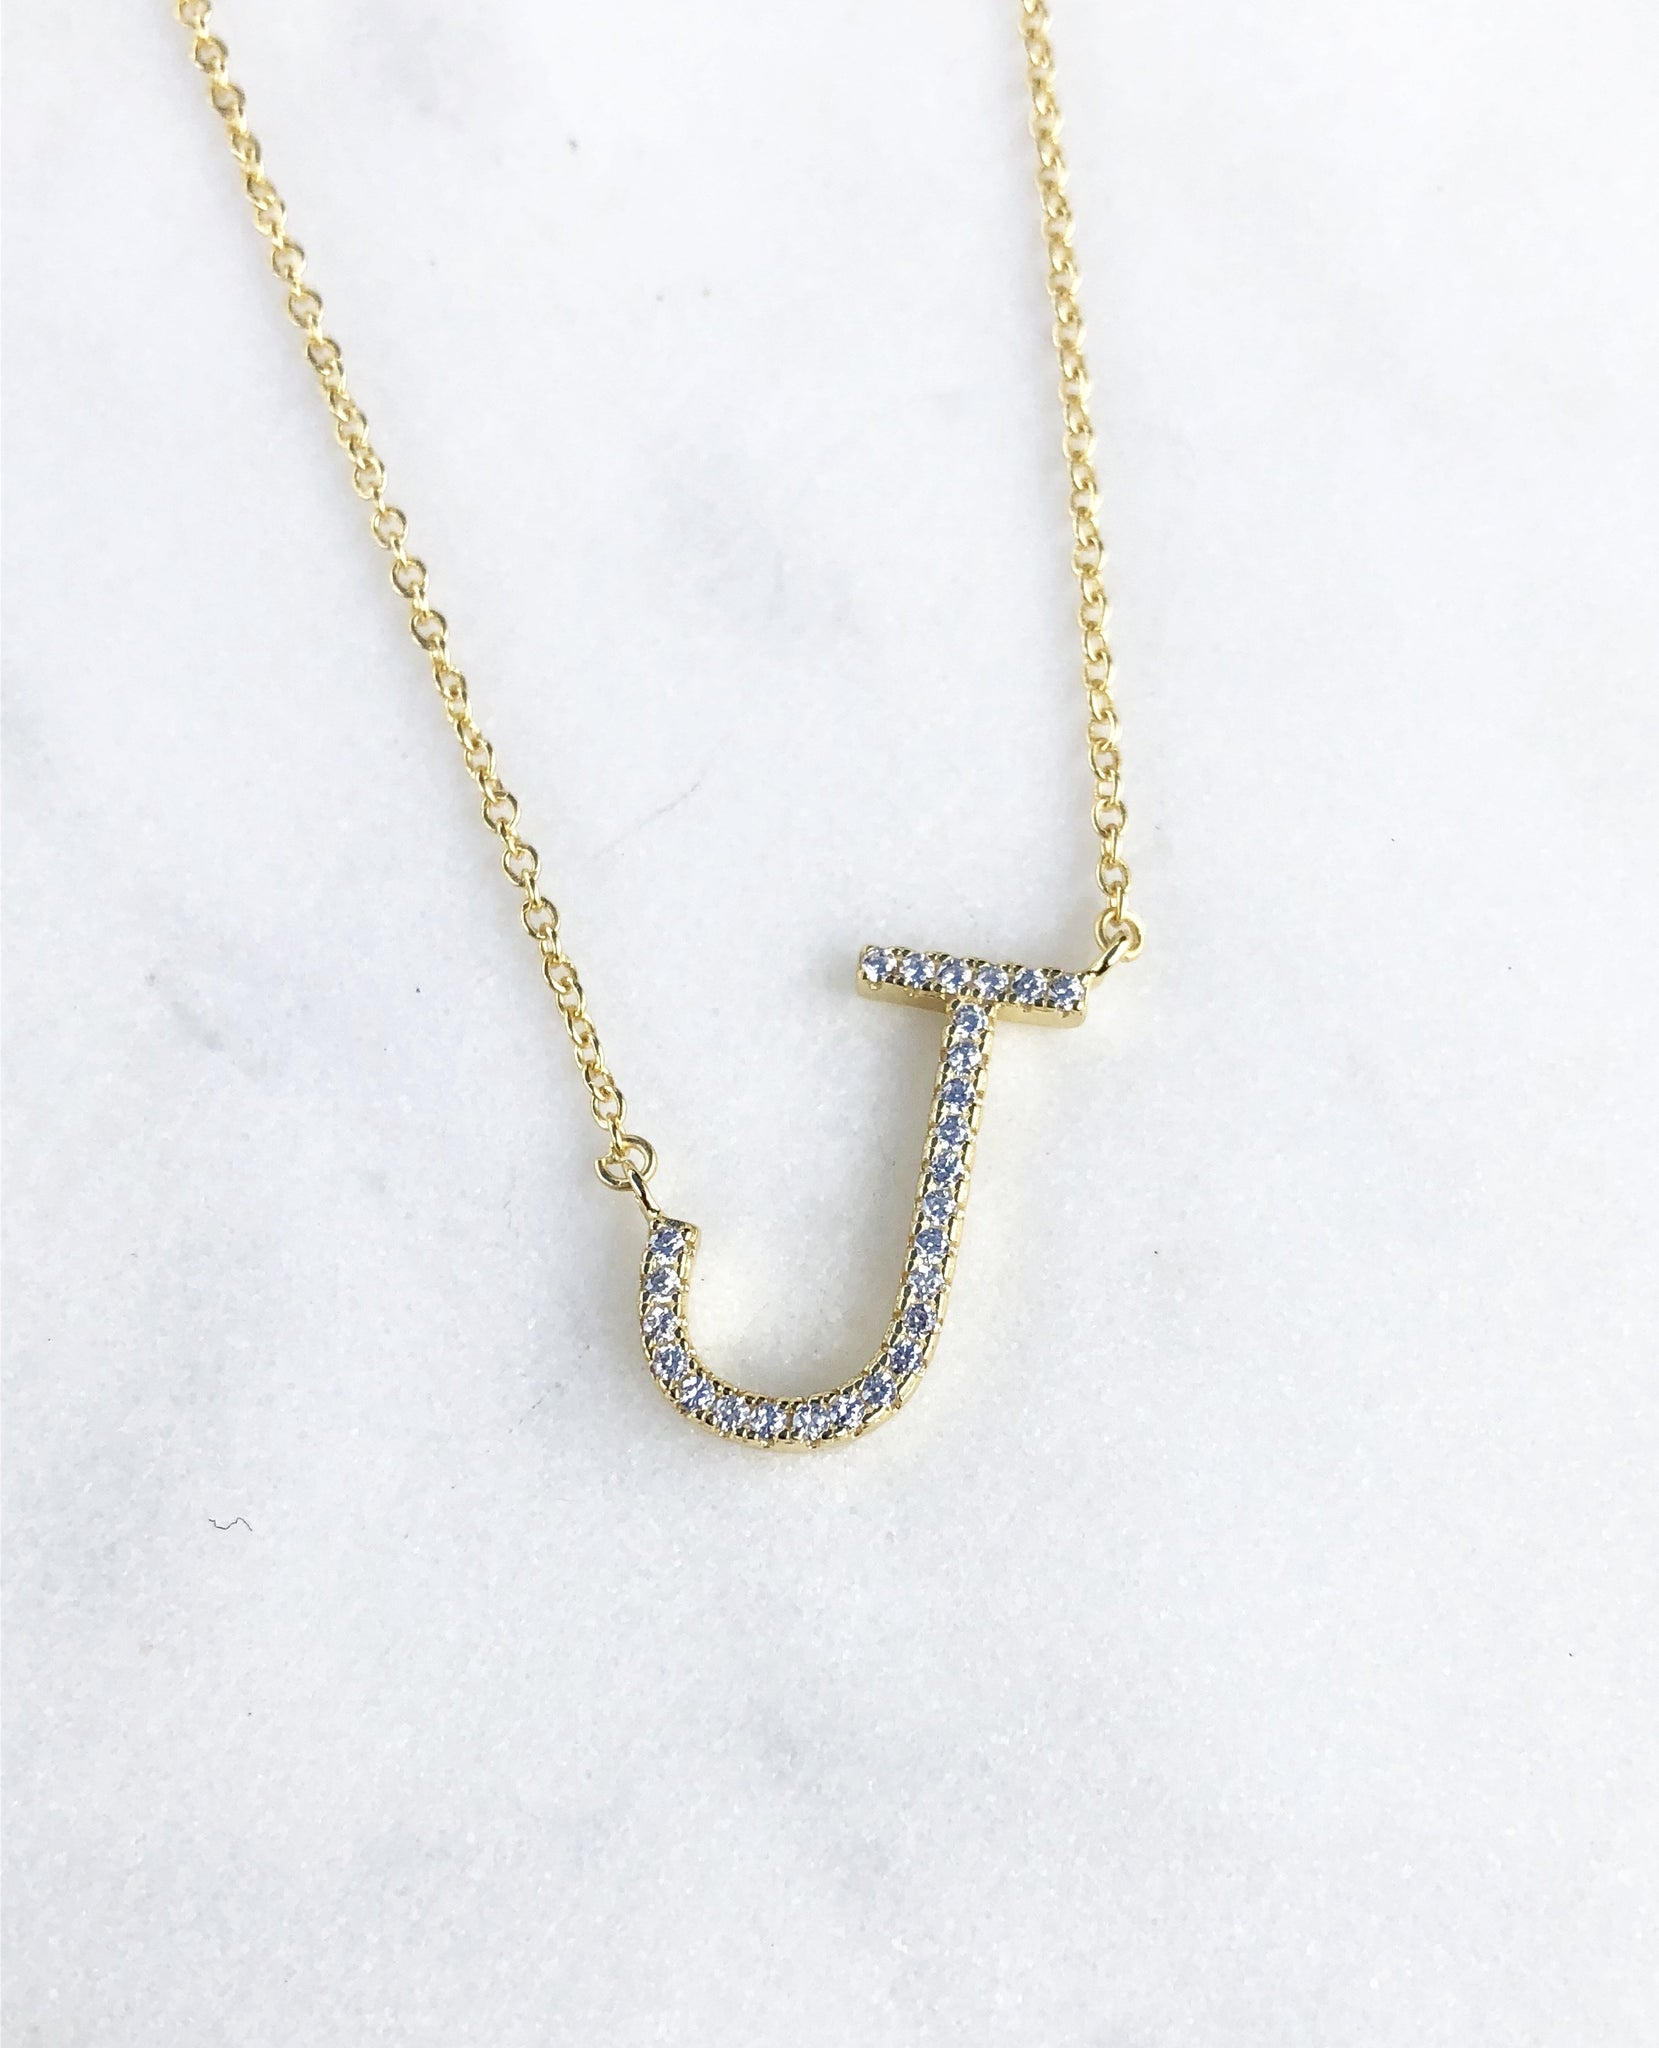 Gold plated alphabet necklace-cz studded initial M 